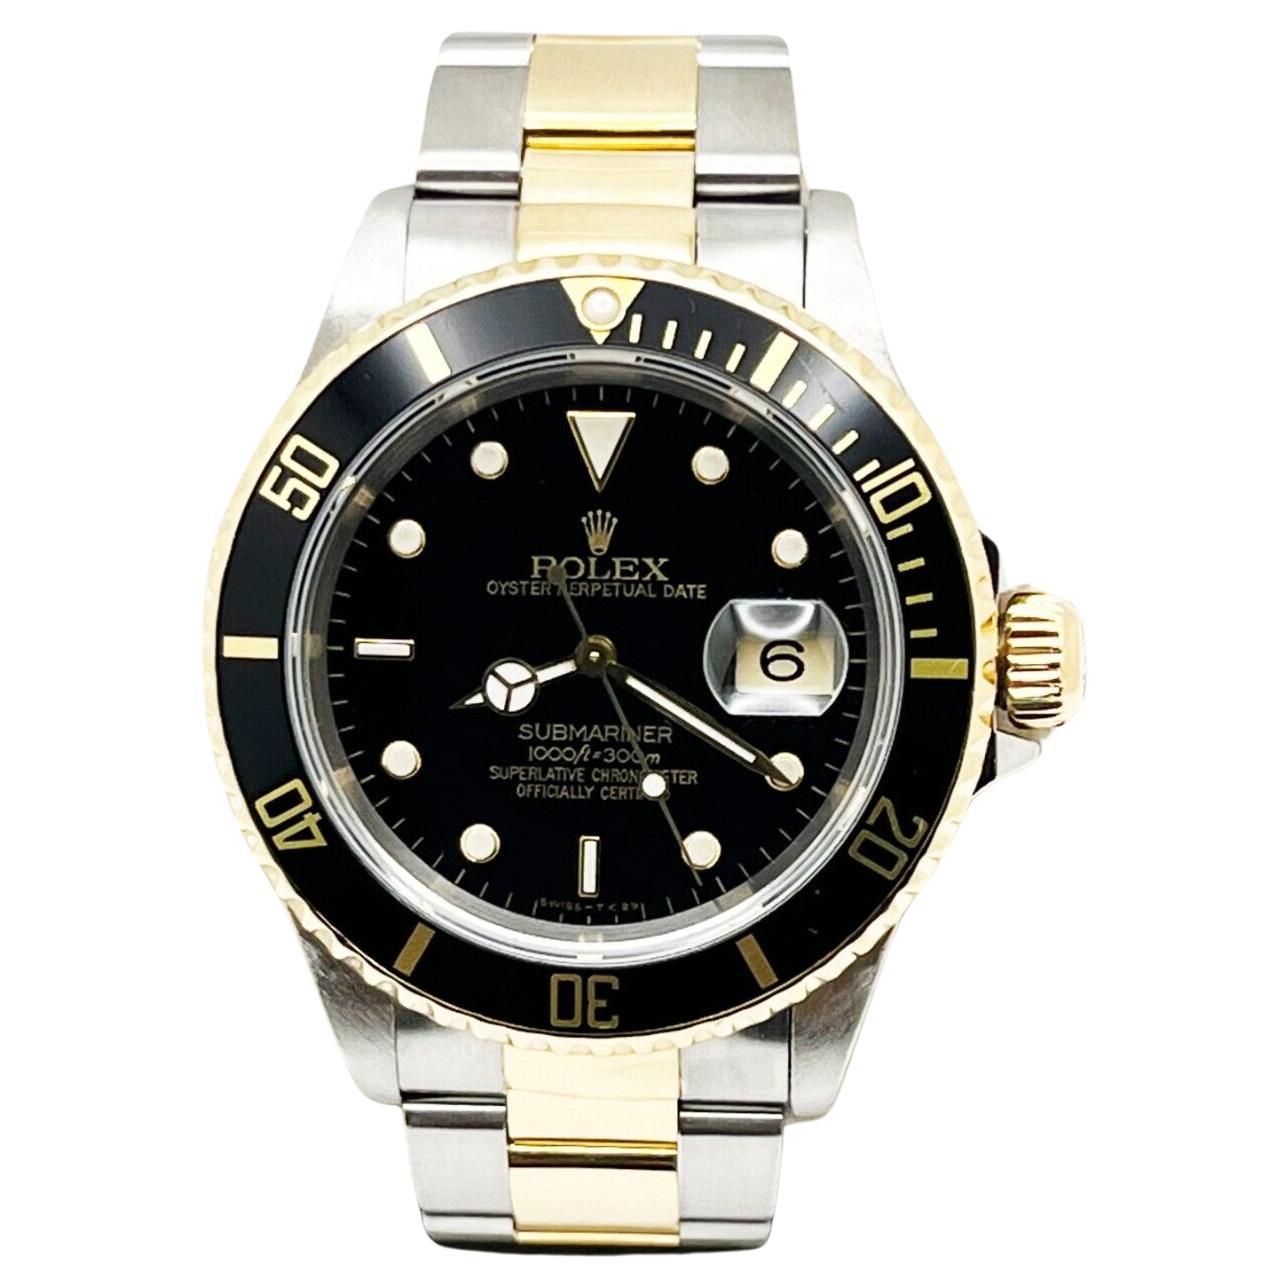 How old are Rolex watches?